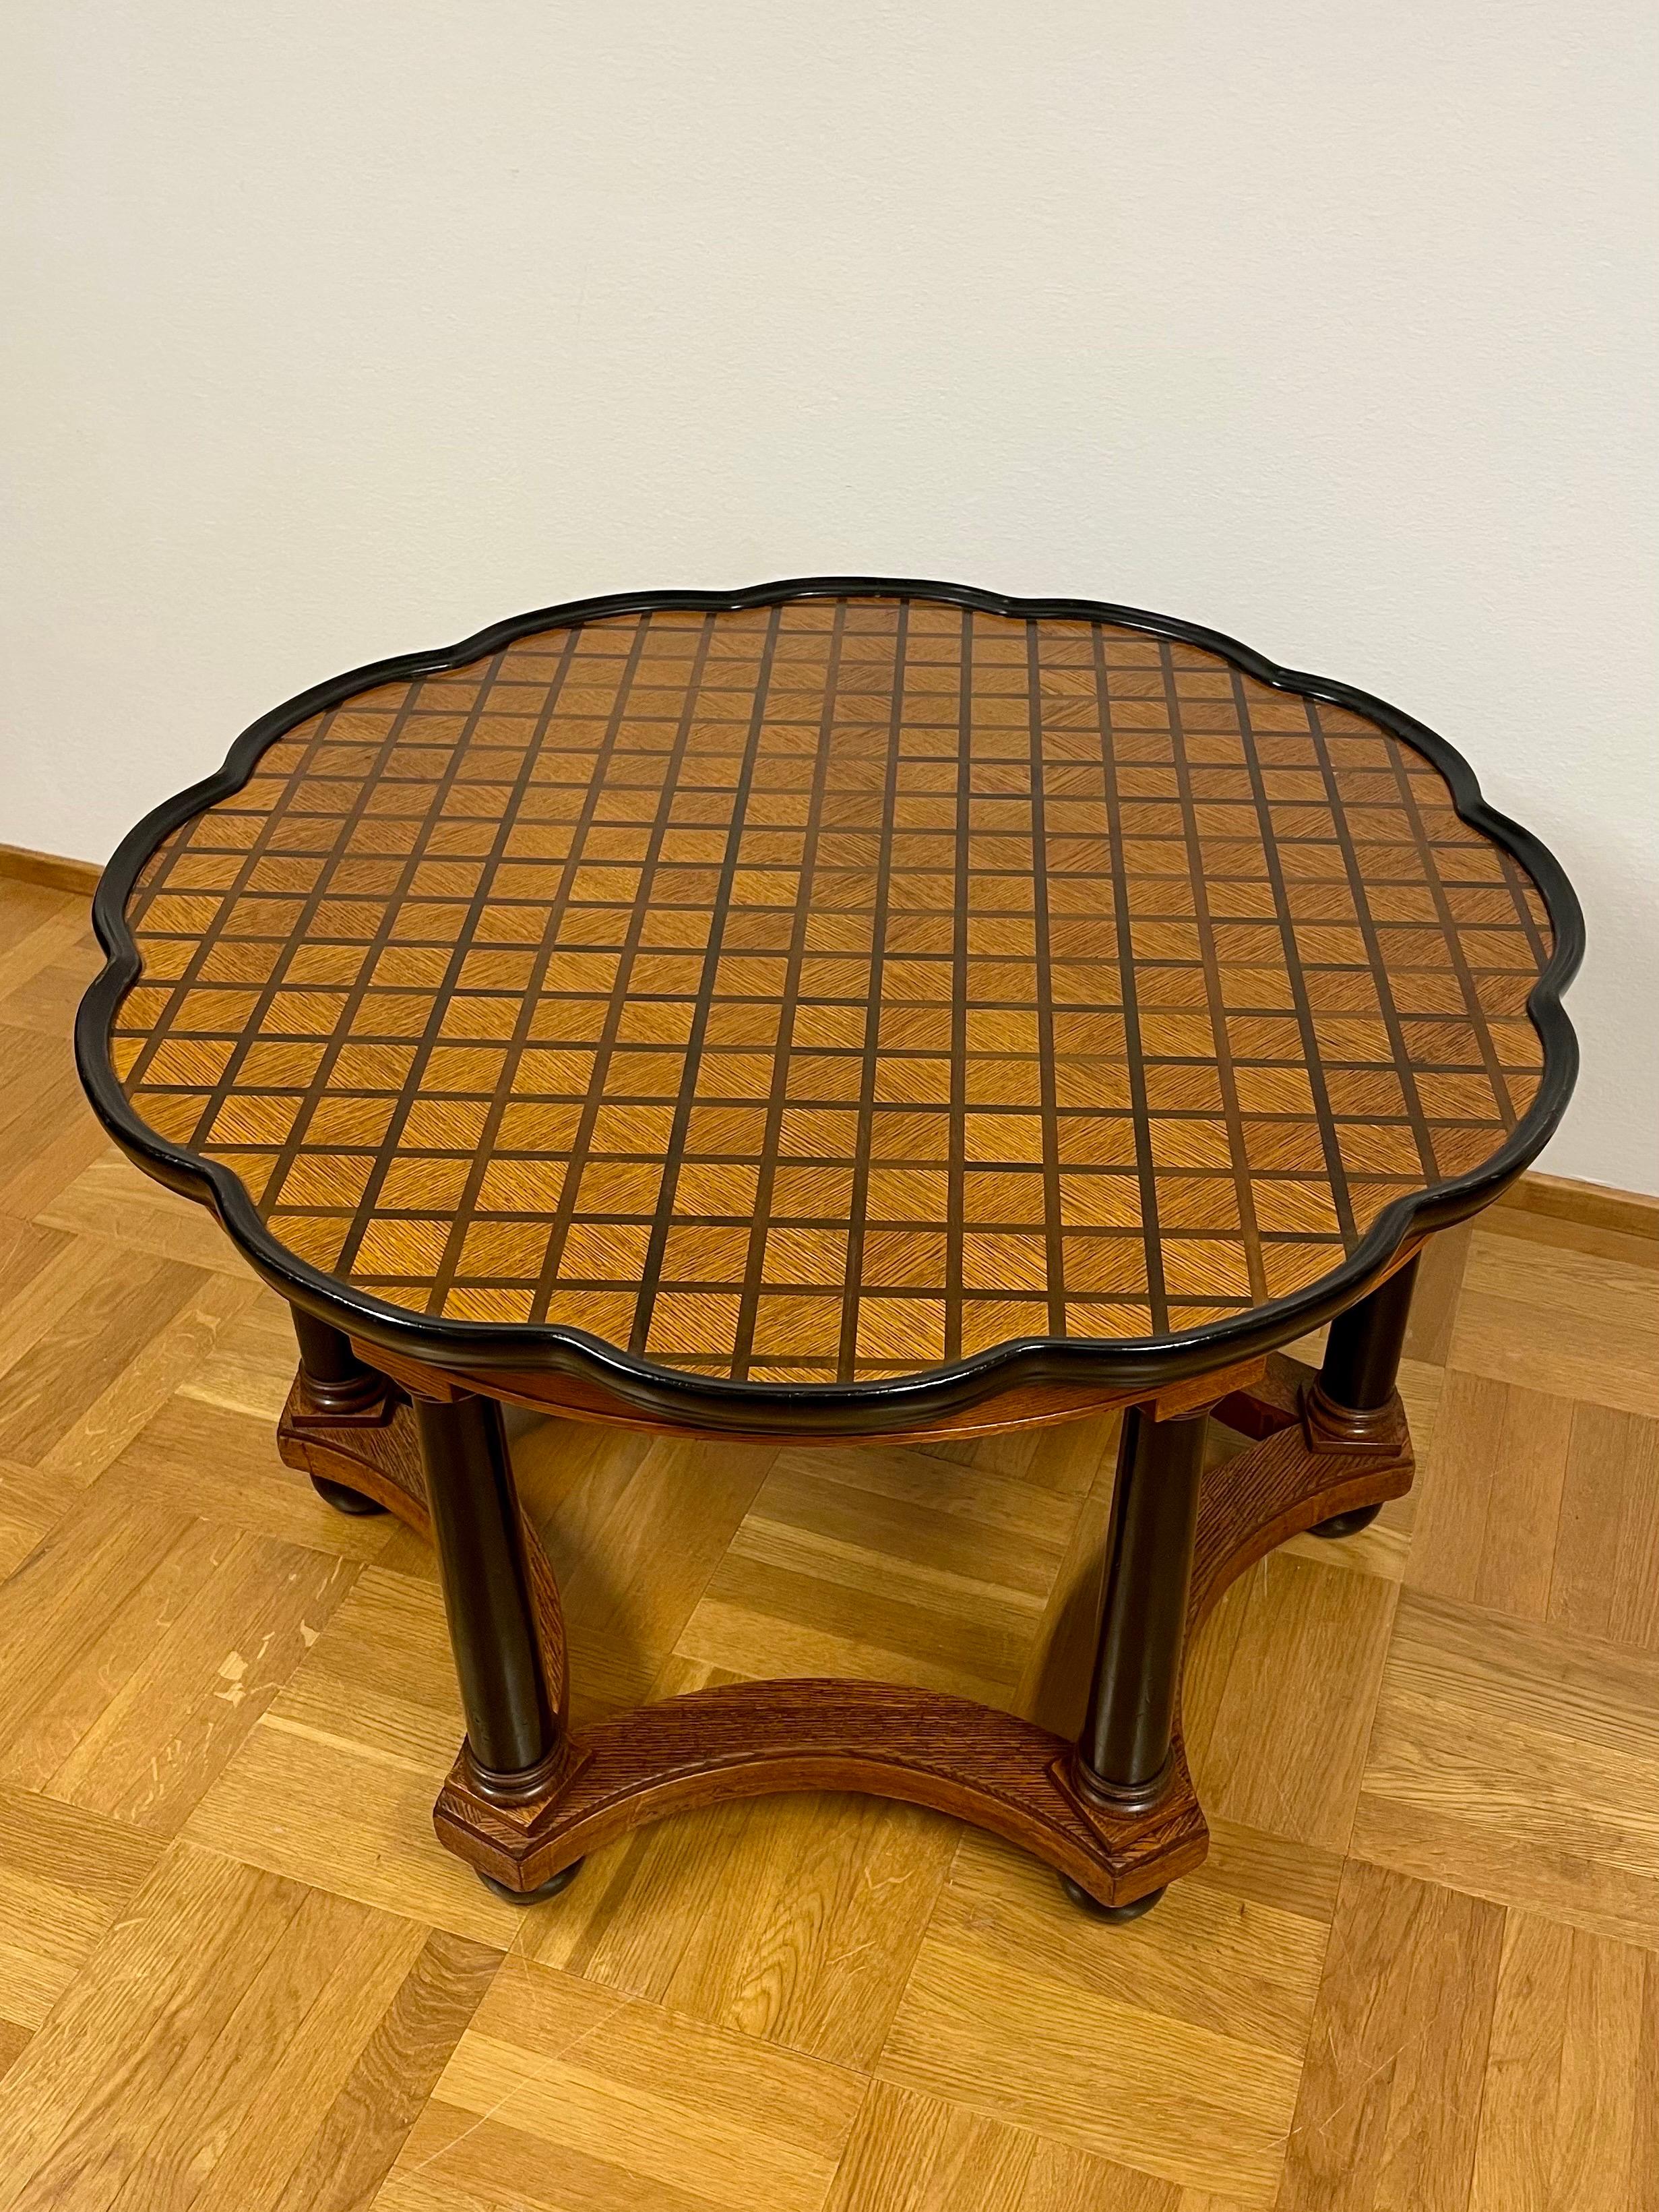 This is the Swedish Art Deco coffee table in the manner of David Blomberg, manager and designer at Nordiska Kompaniet in Stockholm.

It comes with a beautiful shiny dodecagonal, twelve sided, flower shaped table top with a squared pattern of birch,